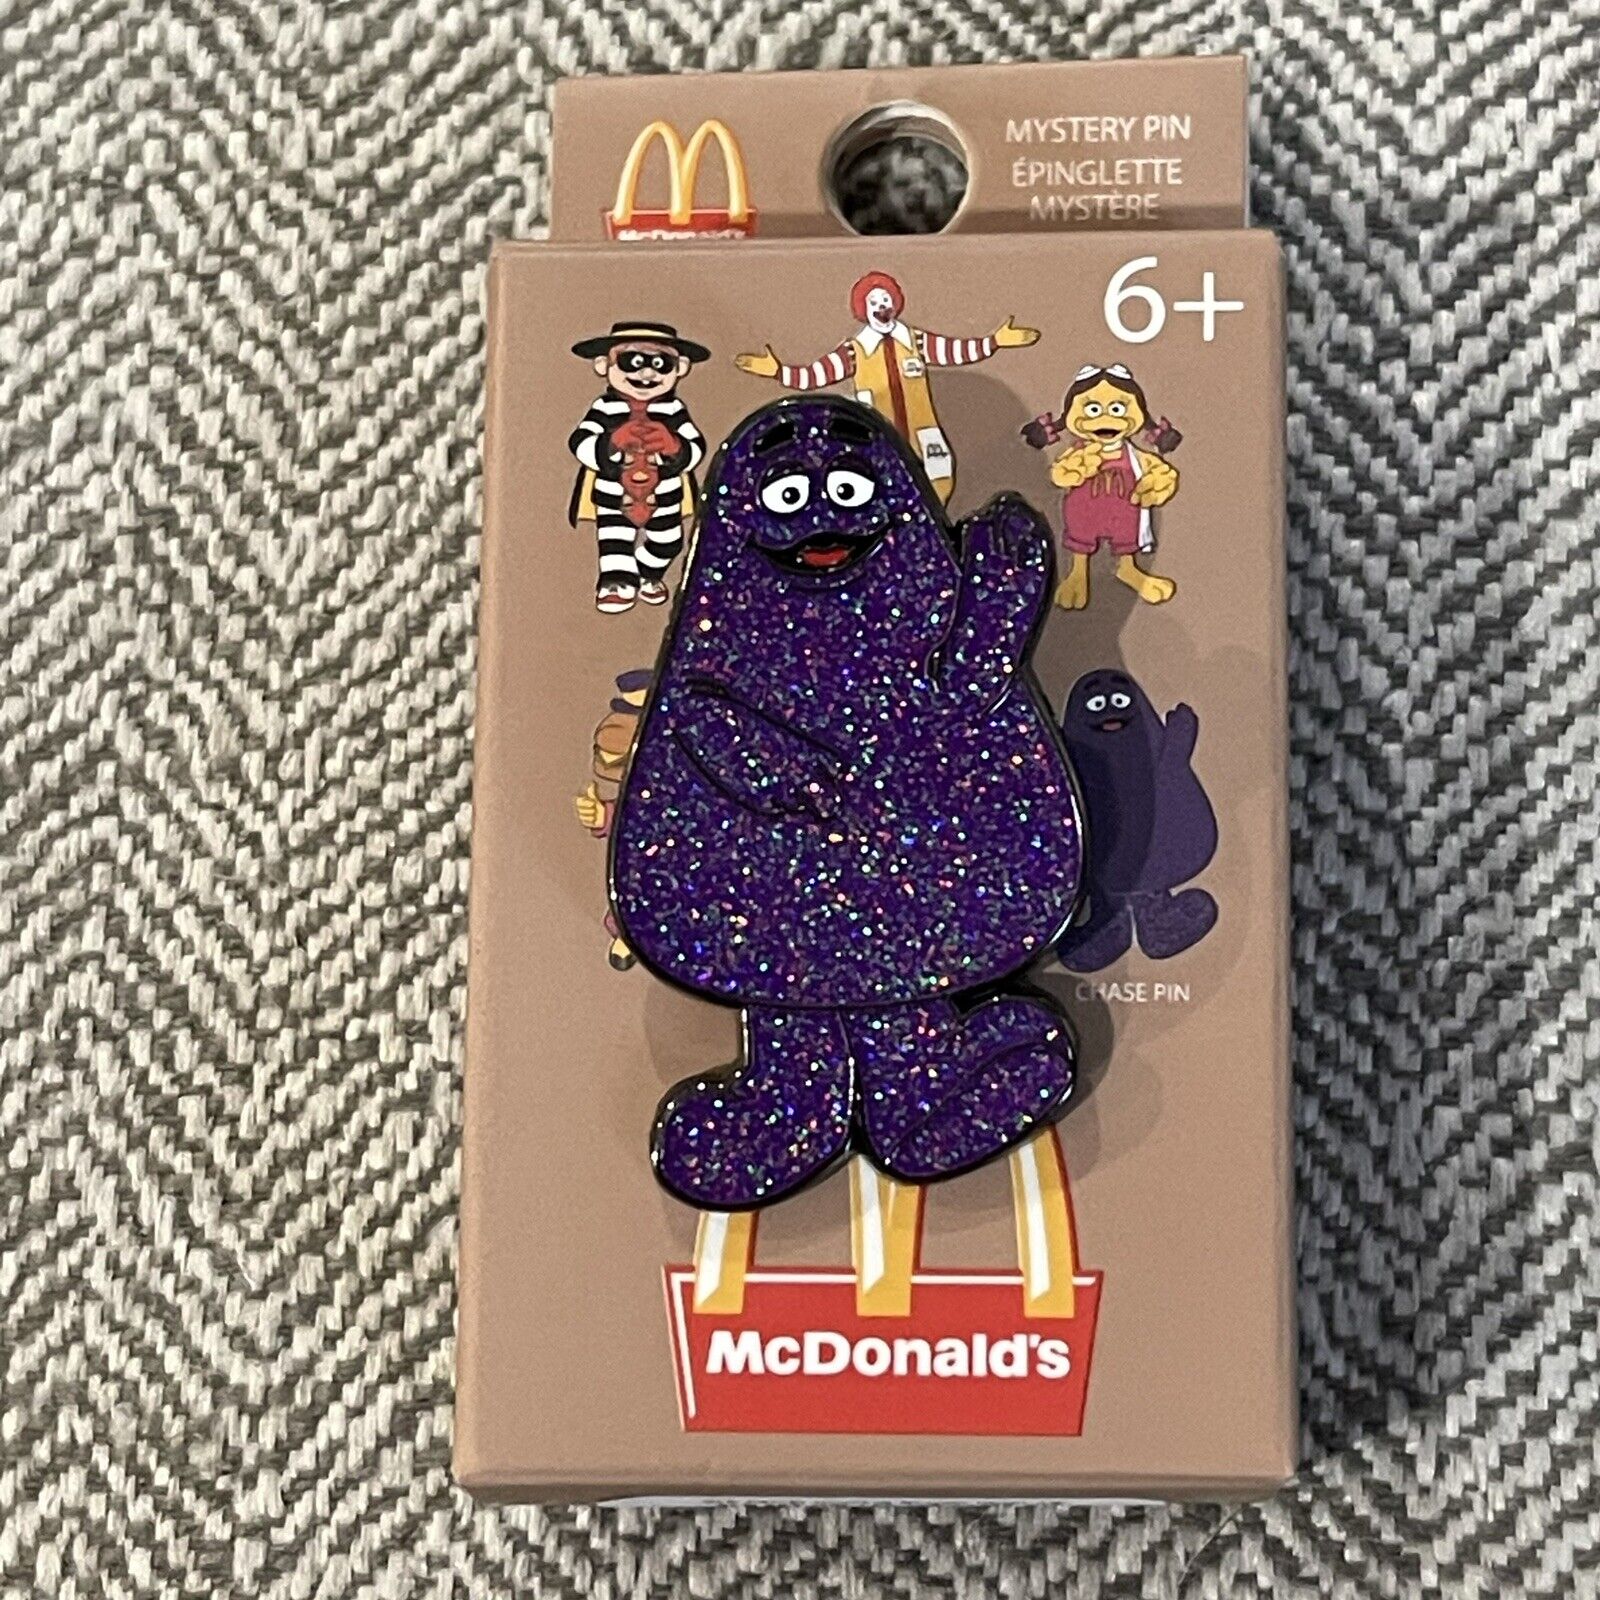 Loungefly McDonald’s Mystery Pin - Grimace CHASE Pin